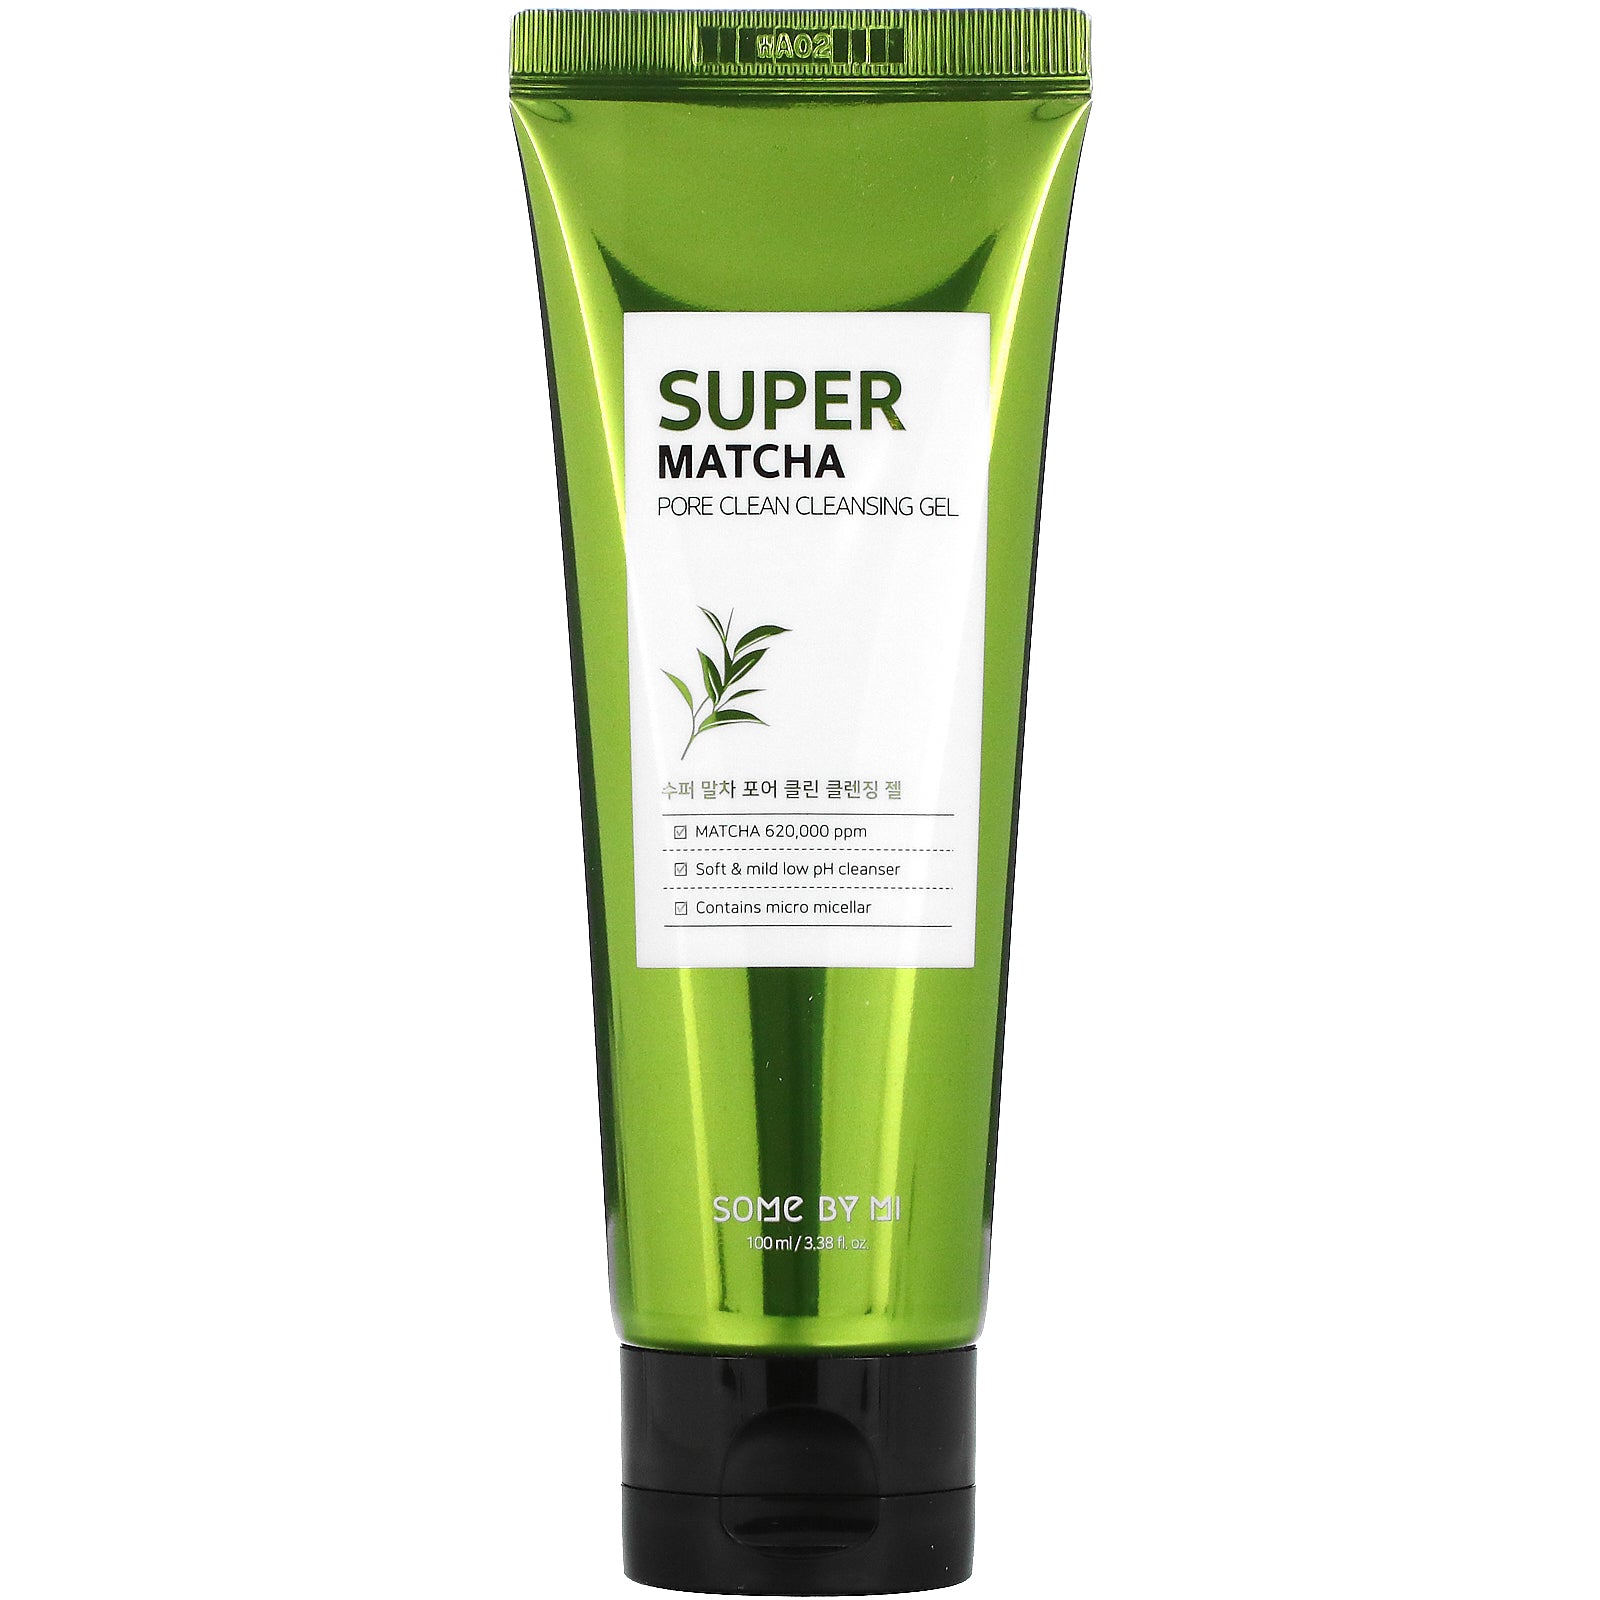 SOME BY MI -SUPER MATCHA PORE CLEANSING GEL